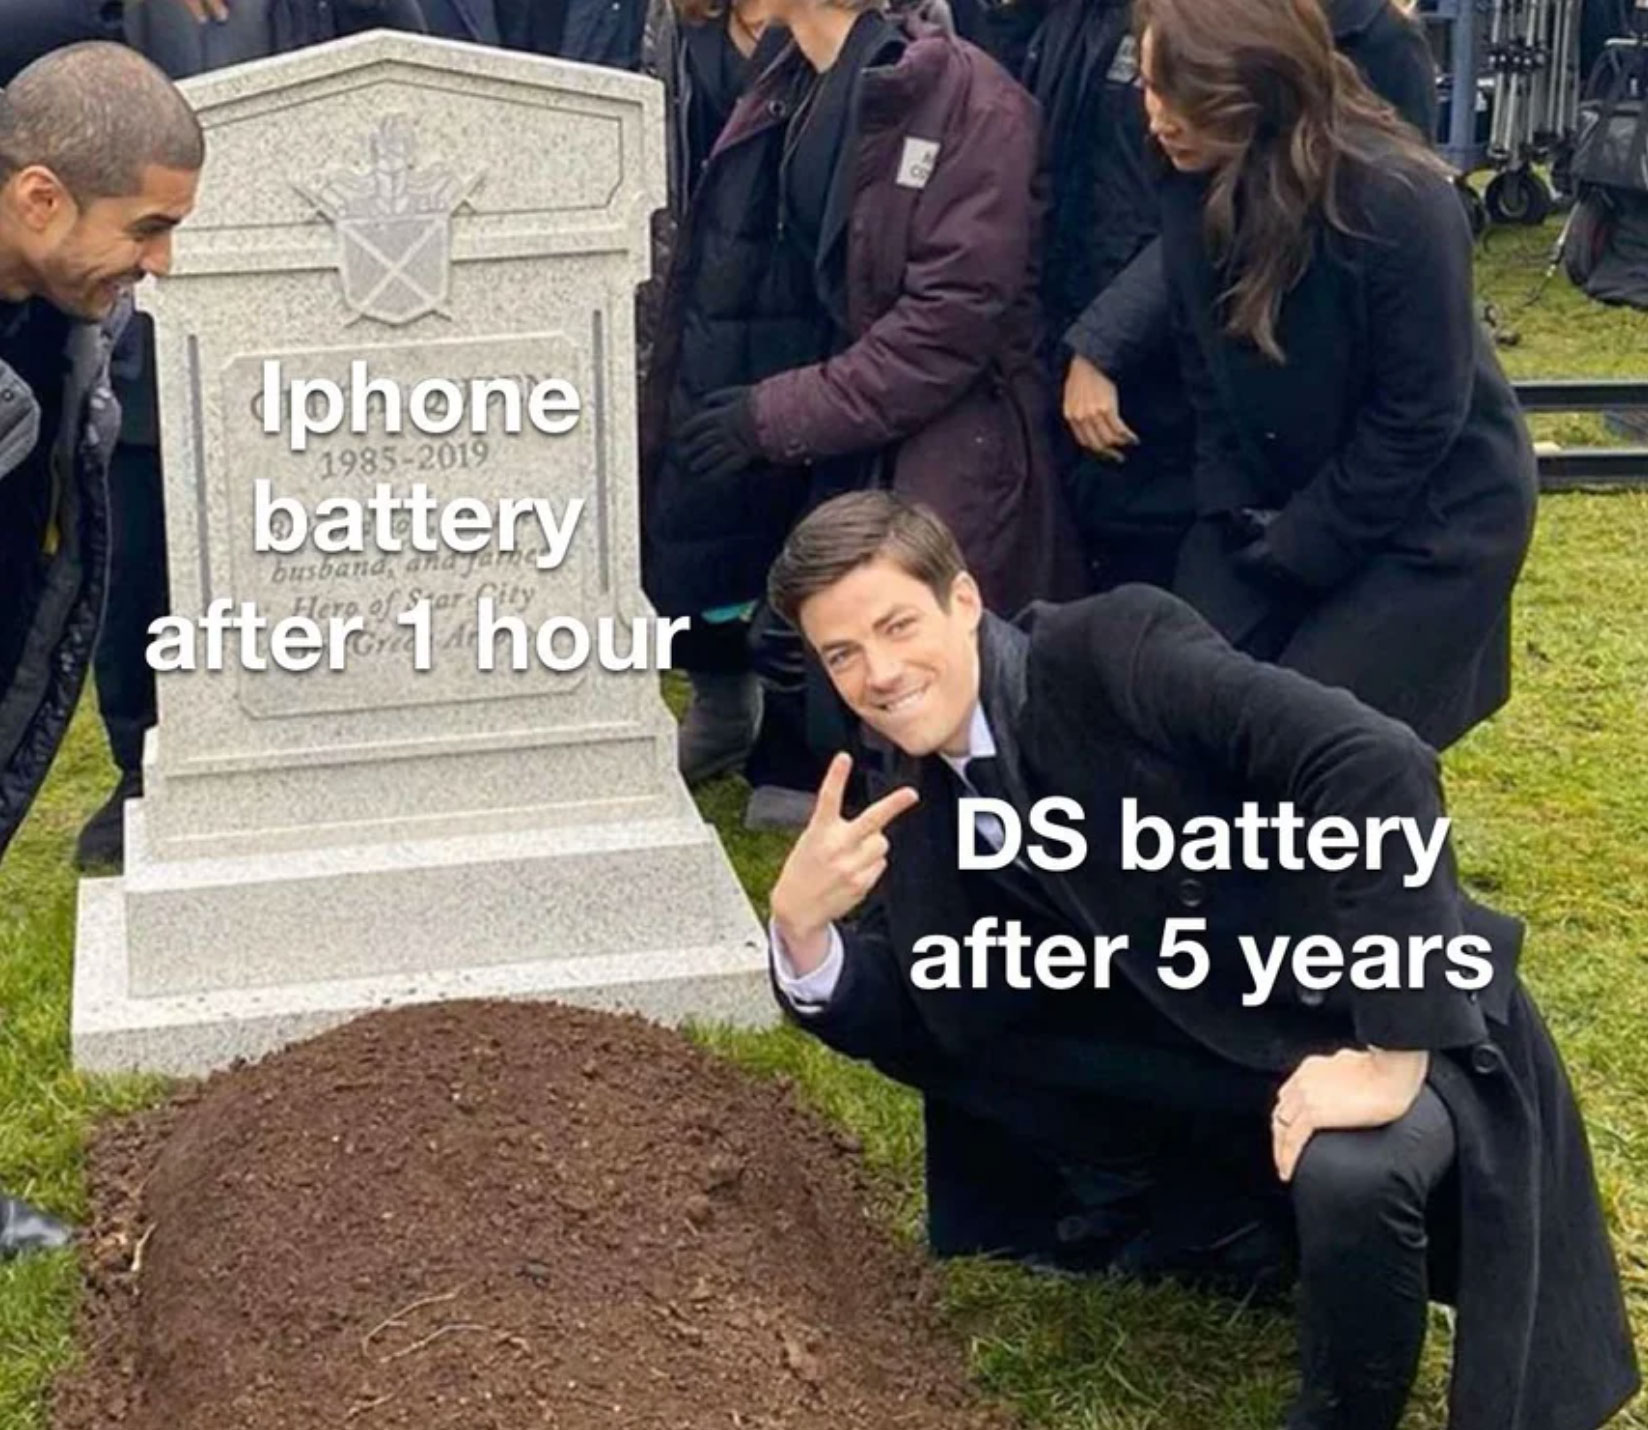 funny gaming memes - 19852019 Iphone battery after 1 hour busband Ds battery after 5 years